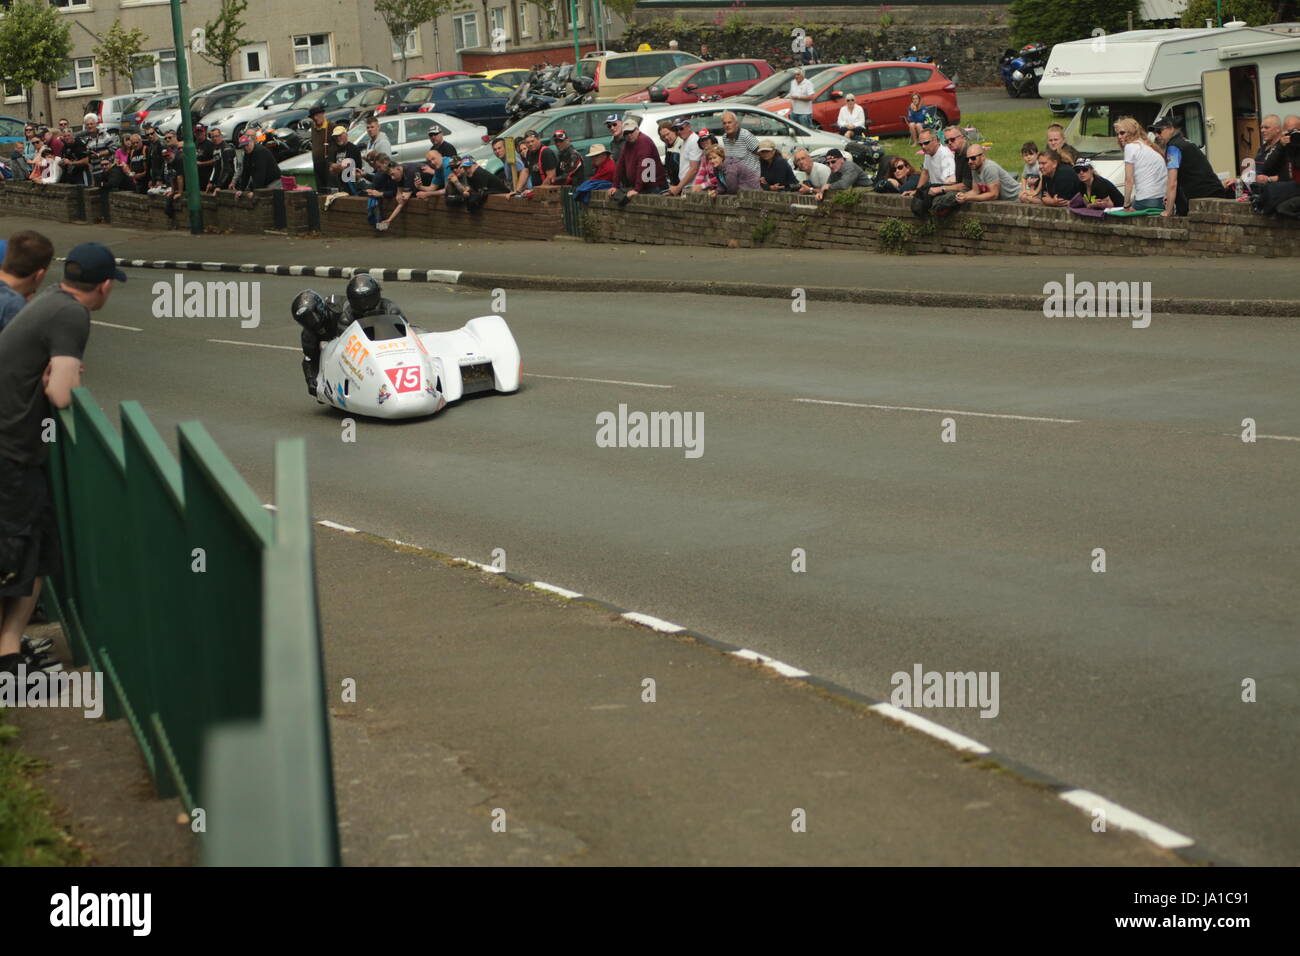 Isle of Man TT Races, Sidecar, Supersport/Lightweight/Newcomers (all classes), Qualifying Session and Practice Race. Saturday, 3 June 2017 at Cruickshank's Corner, Ramsey, Isle of Man Credit: Eclectic Art and Photography/Alamy Live News Stock Photo